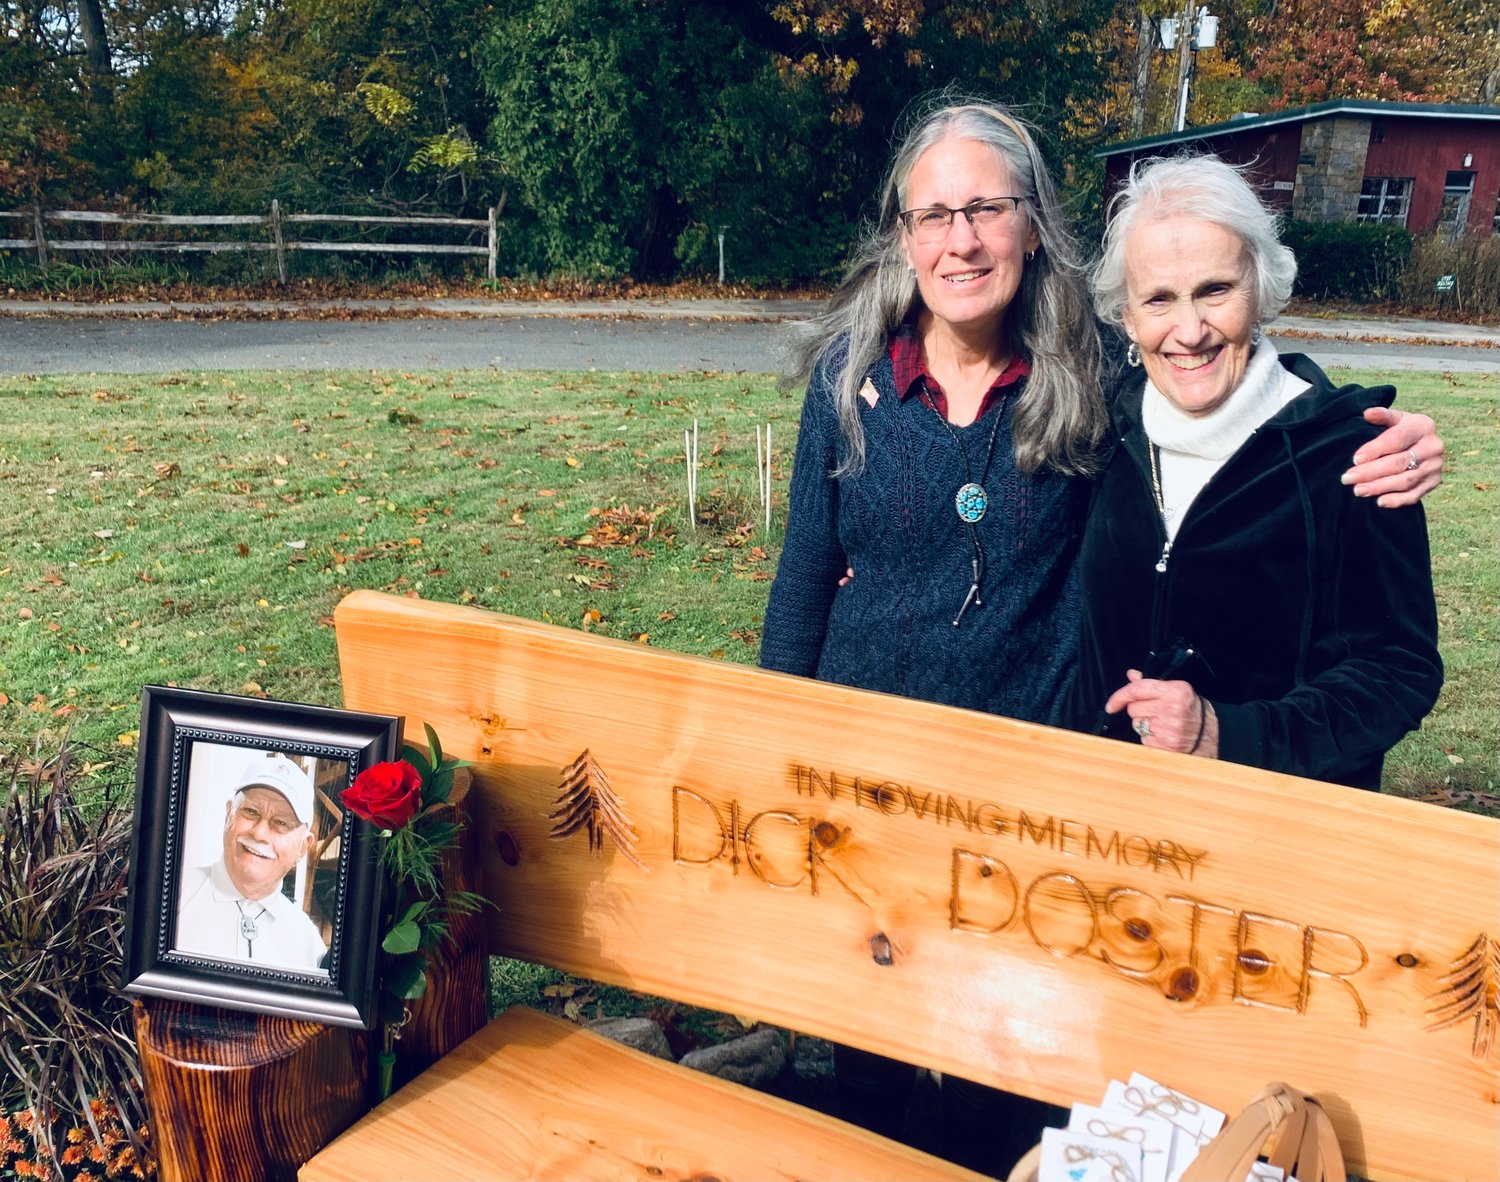 Richard Doster’s daughter Linda Notarnicola and his widow Joan stood behind the bench donated in Doster’s memory.